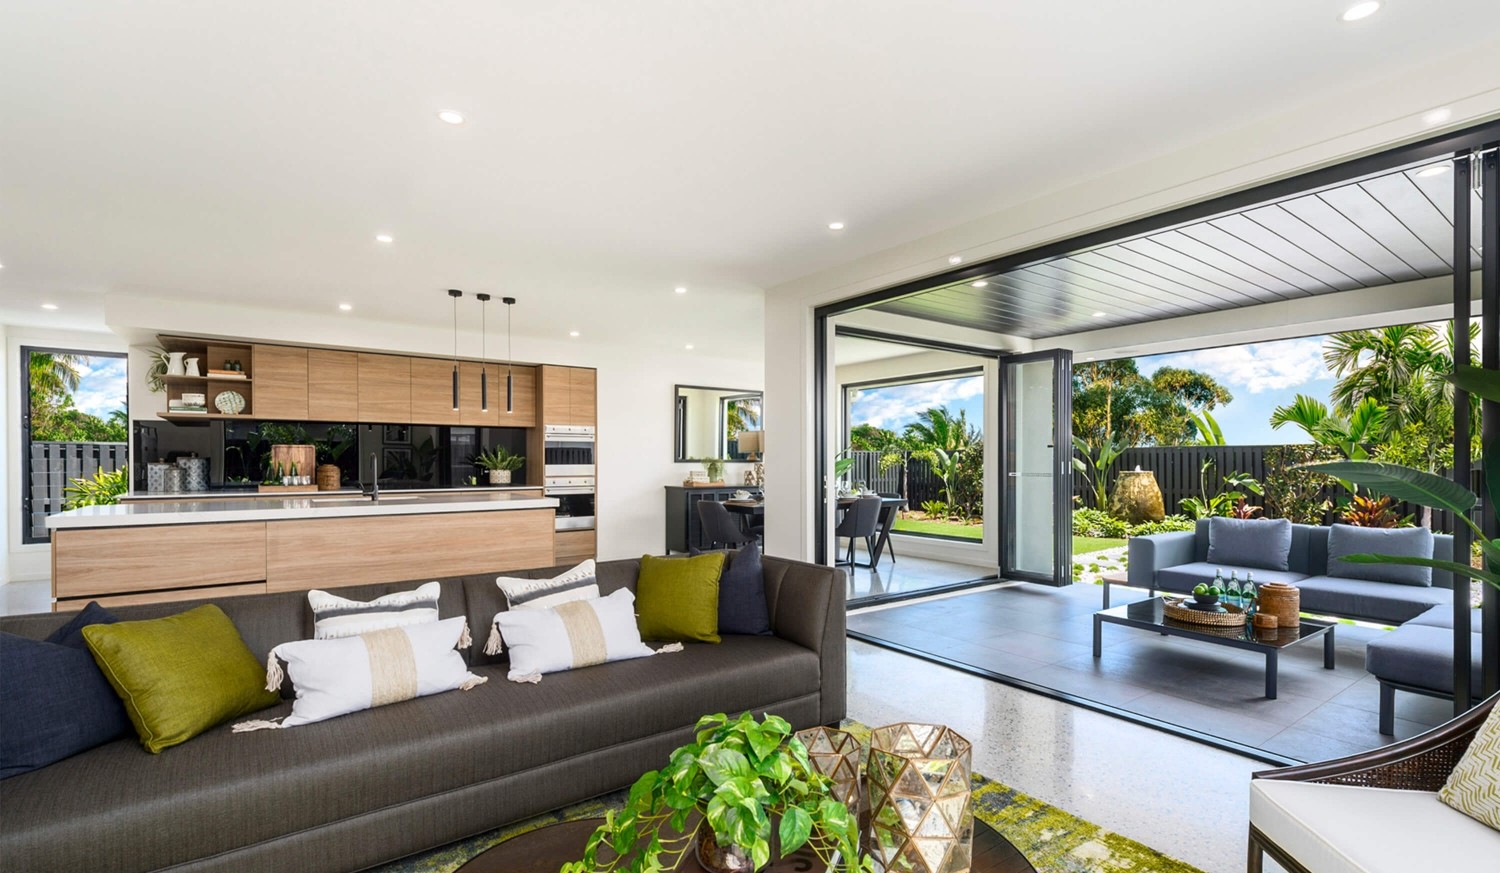 The Surrounds Helensvale Display Homes